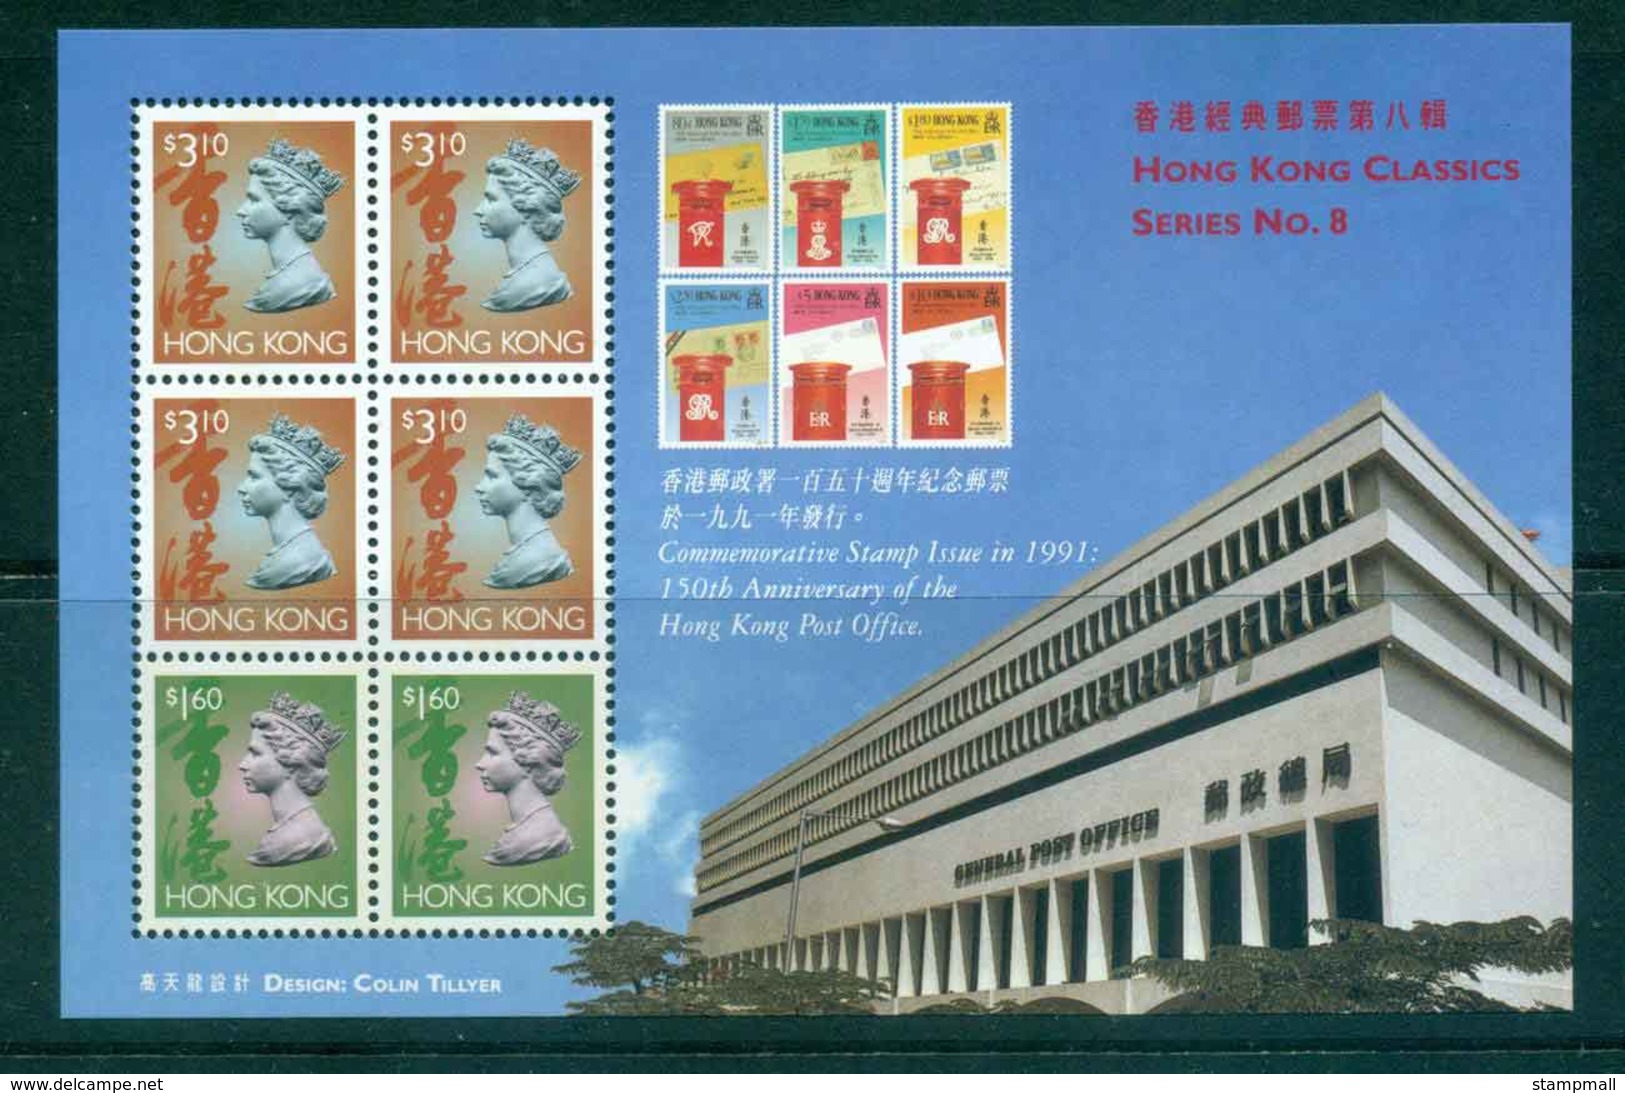 Hong Kong 1997 $1.60x2, $3.10x4 HK Classic Series #8 MS MUH Lot46207 - Other & Unclassified